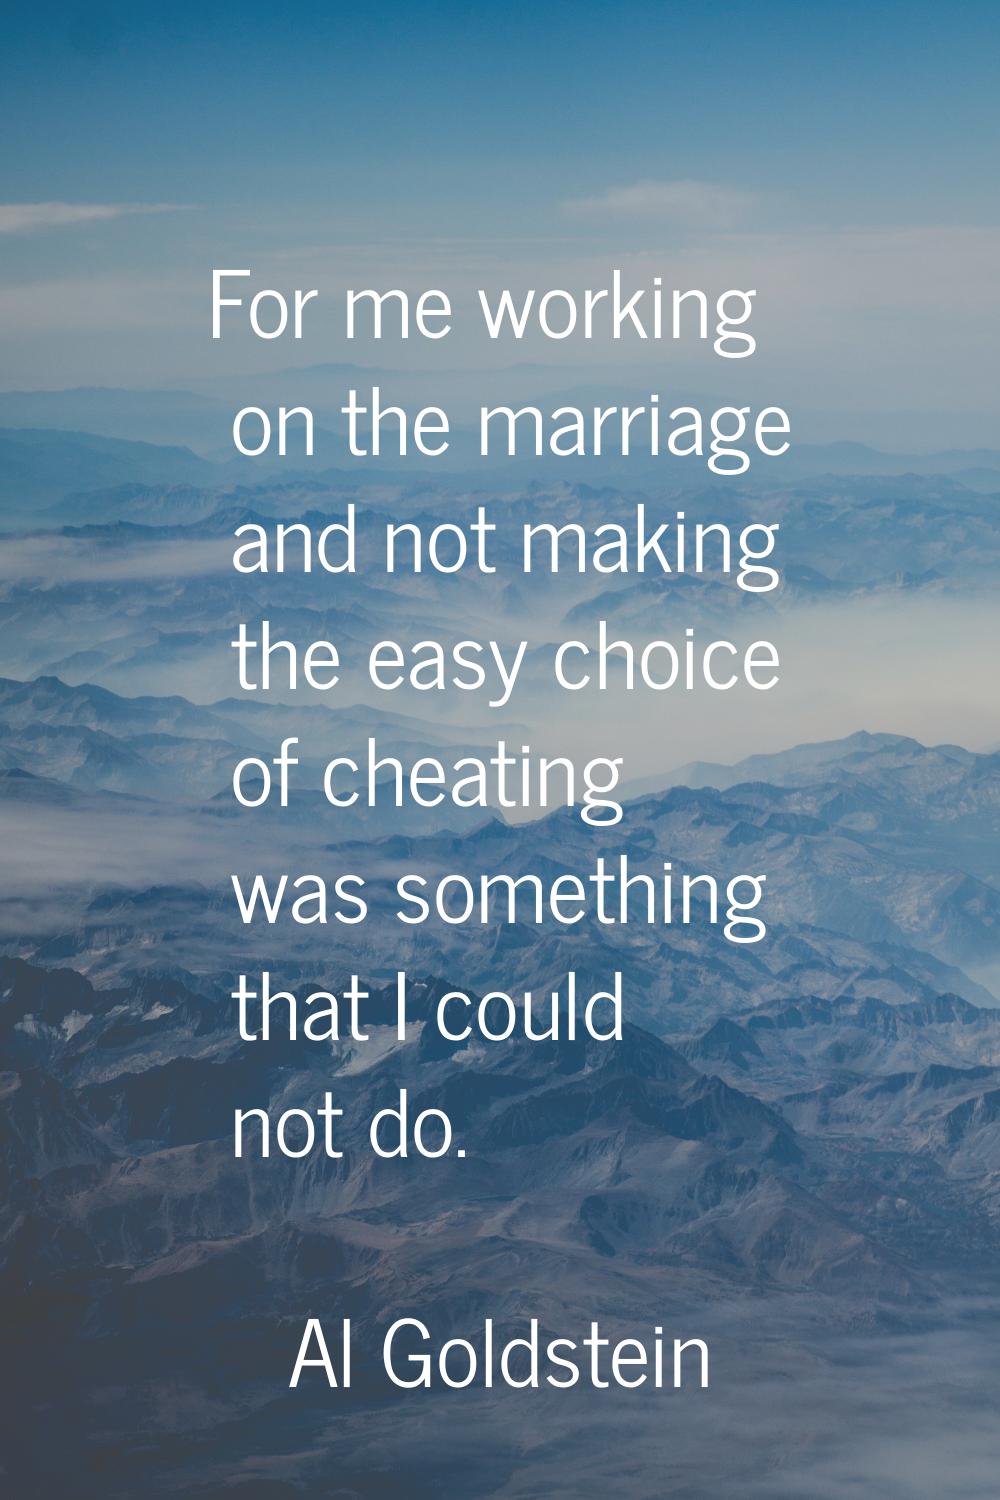 For me working on the marriage and not making the easy choice of cheating was something that I coul